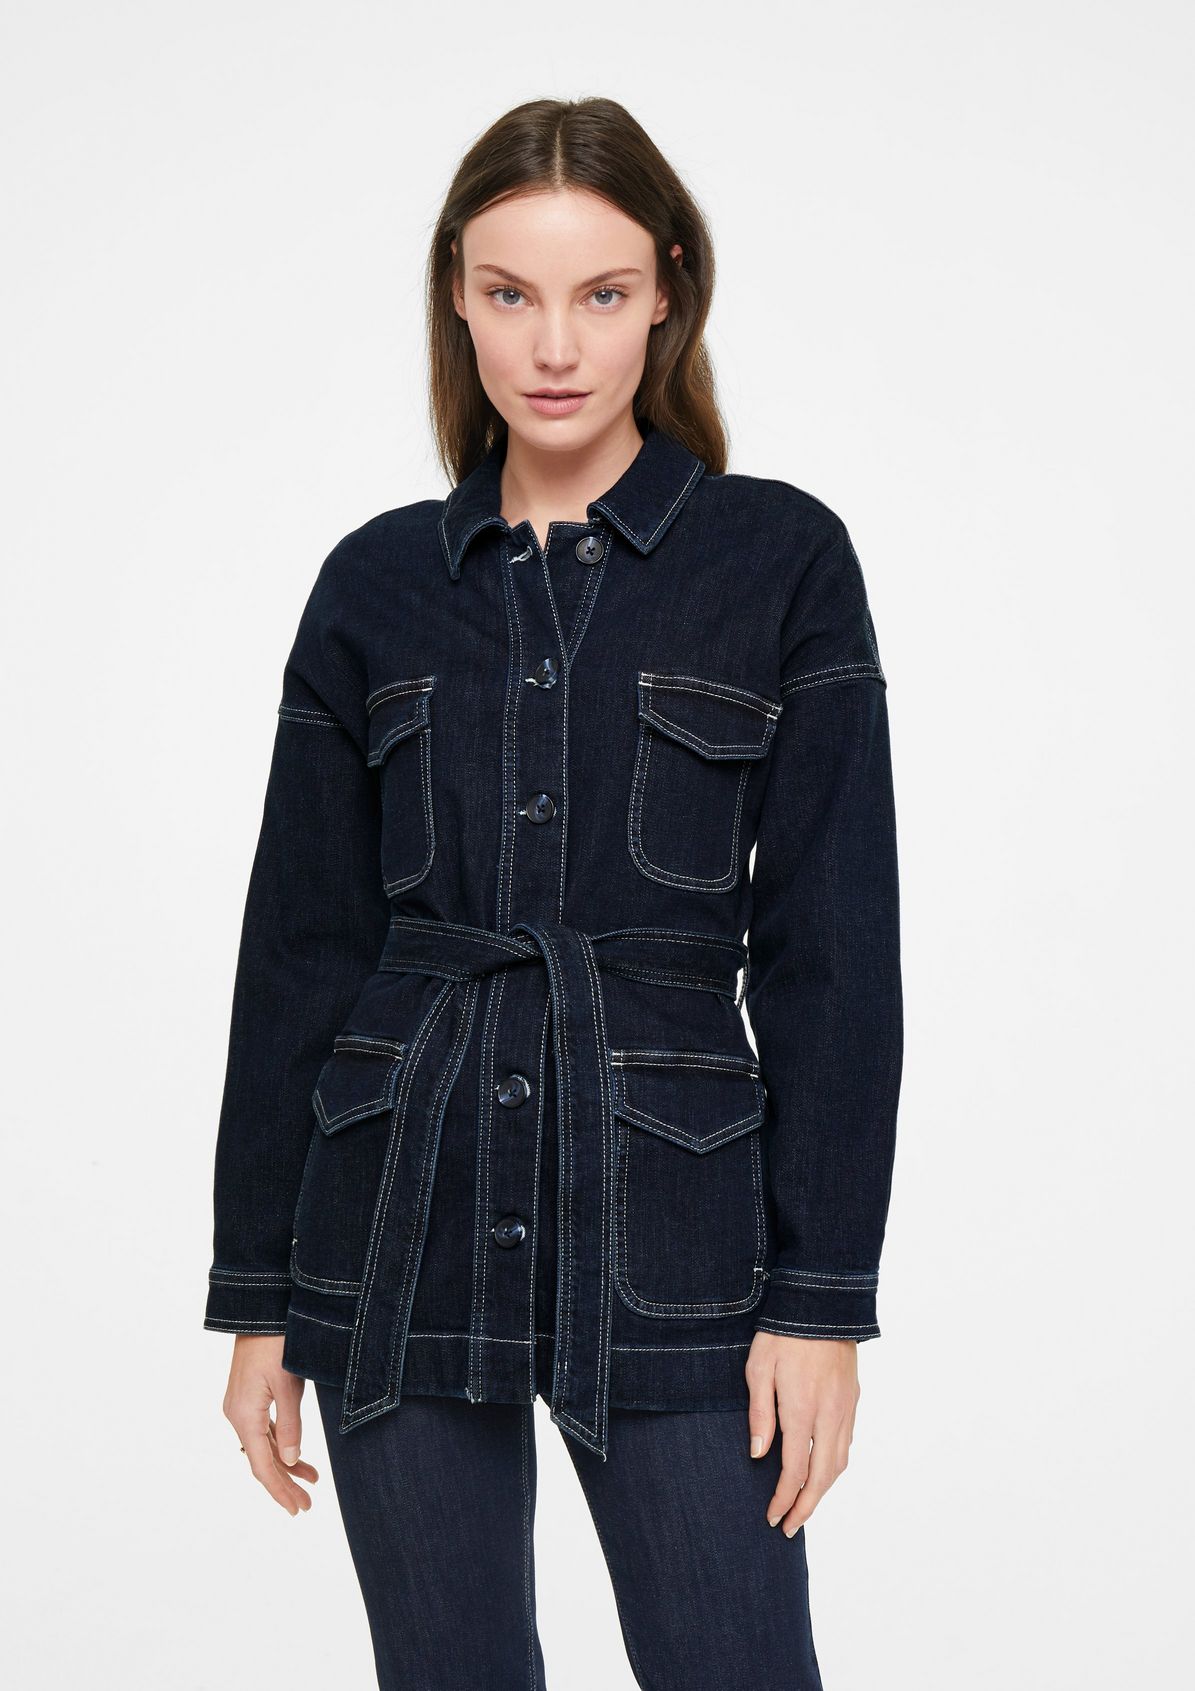 Denim jacket with a tie belt from comma